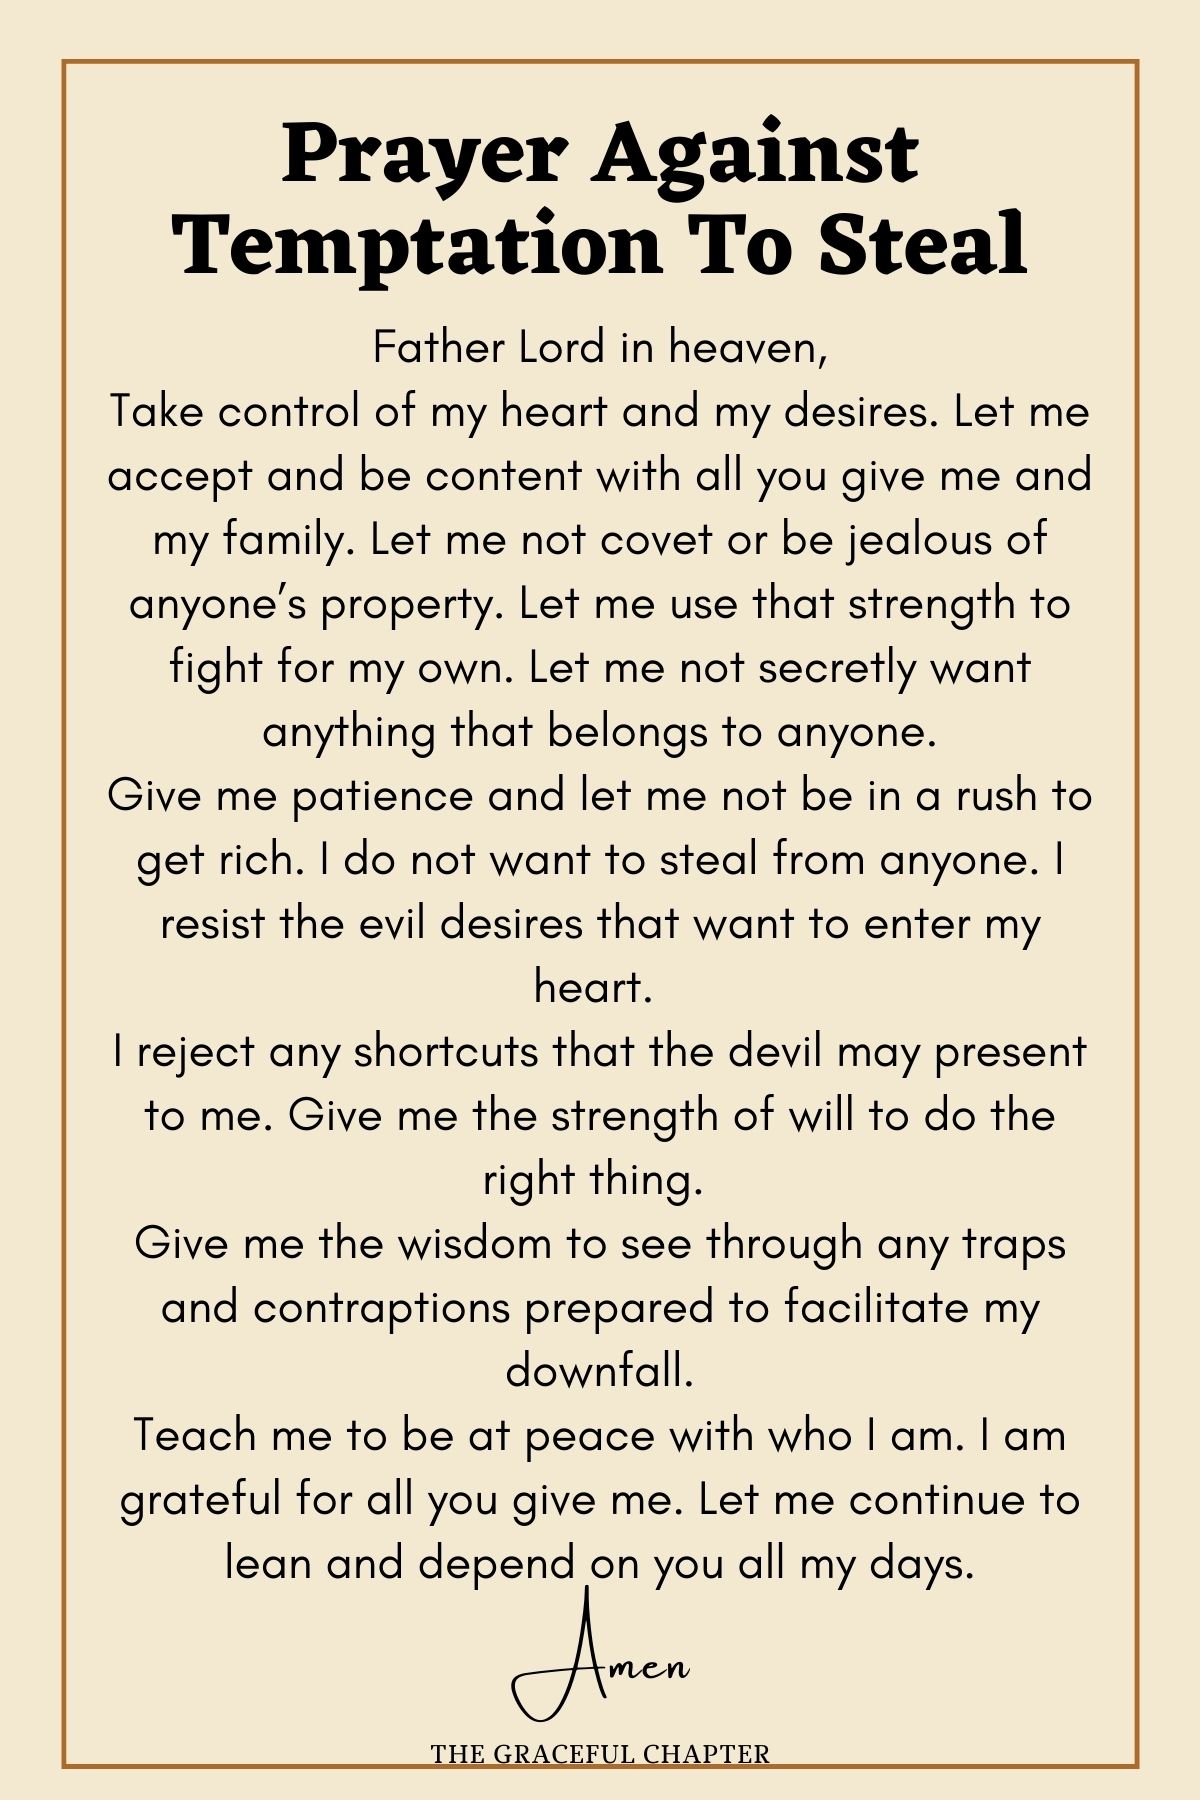 Prayer against temptation to steal